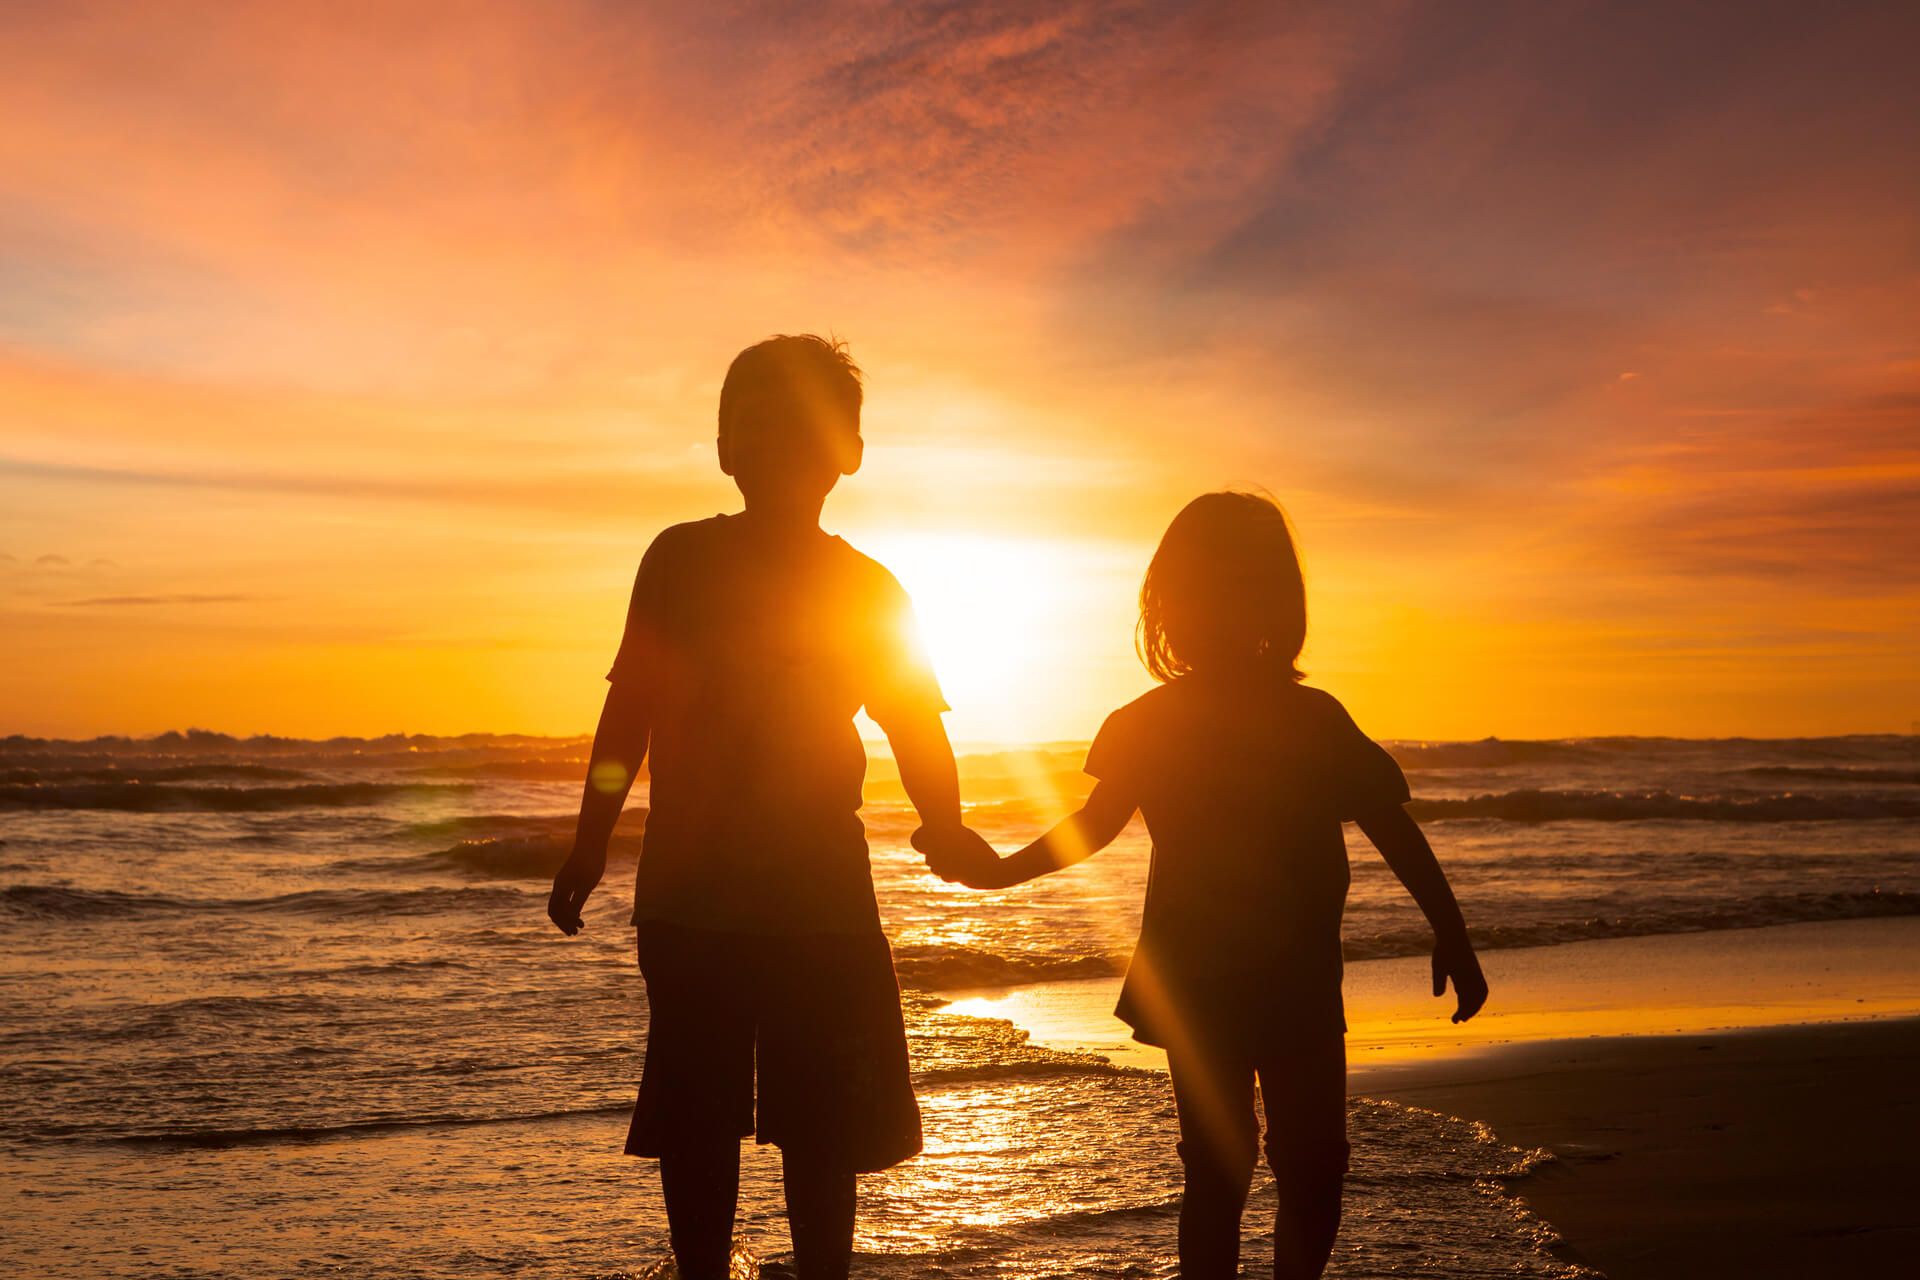 two kids on a beach with their guardian at sunset